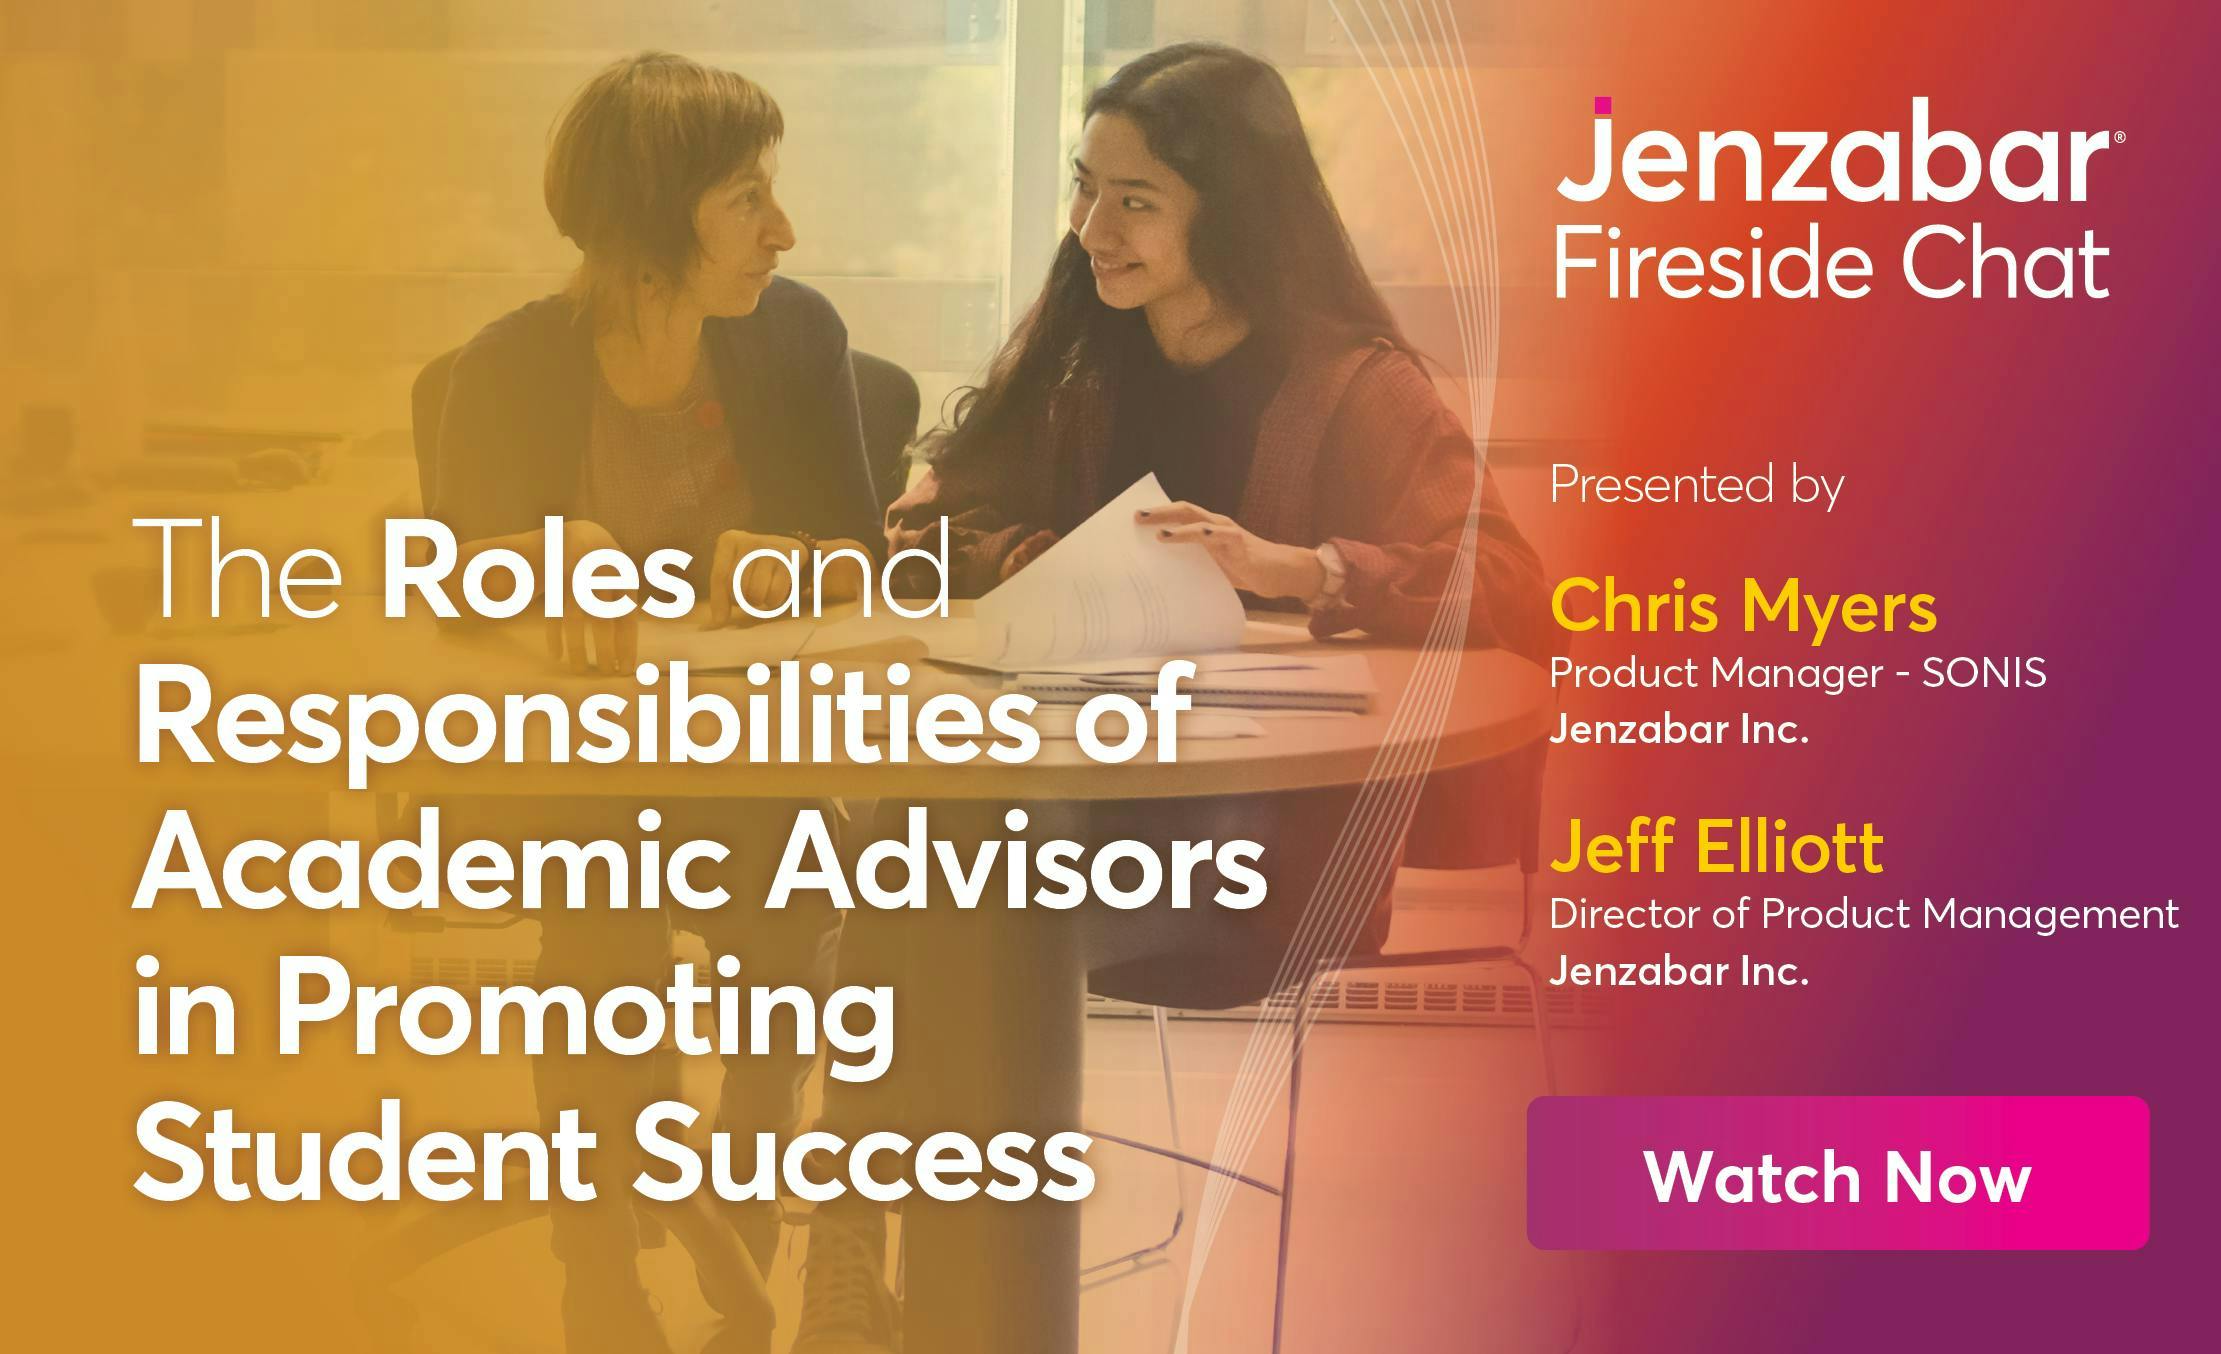 Fireside Chat: The Roles and Responsibilities of Academic Advisors in Promoting Student Success